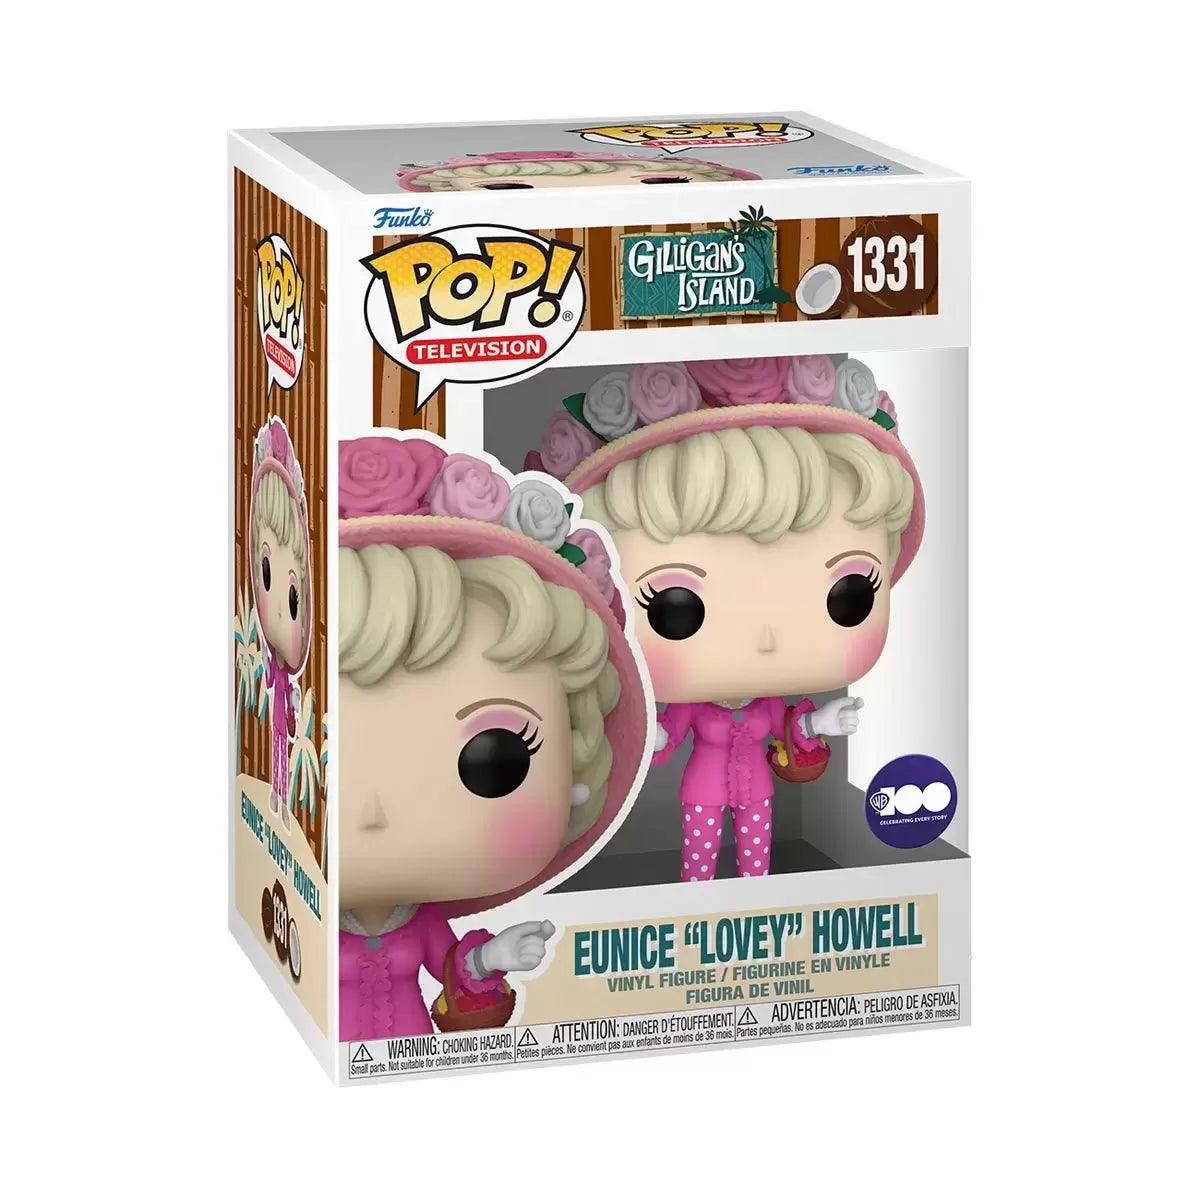 Pop! Television - Gilligan's Island - Eunice "Lovely" Howell - #1331 - Hobby Champion Inc